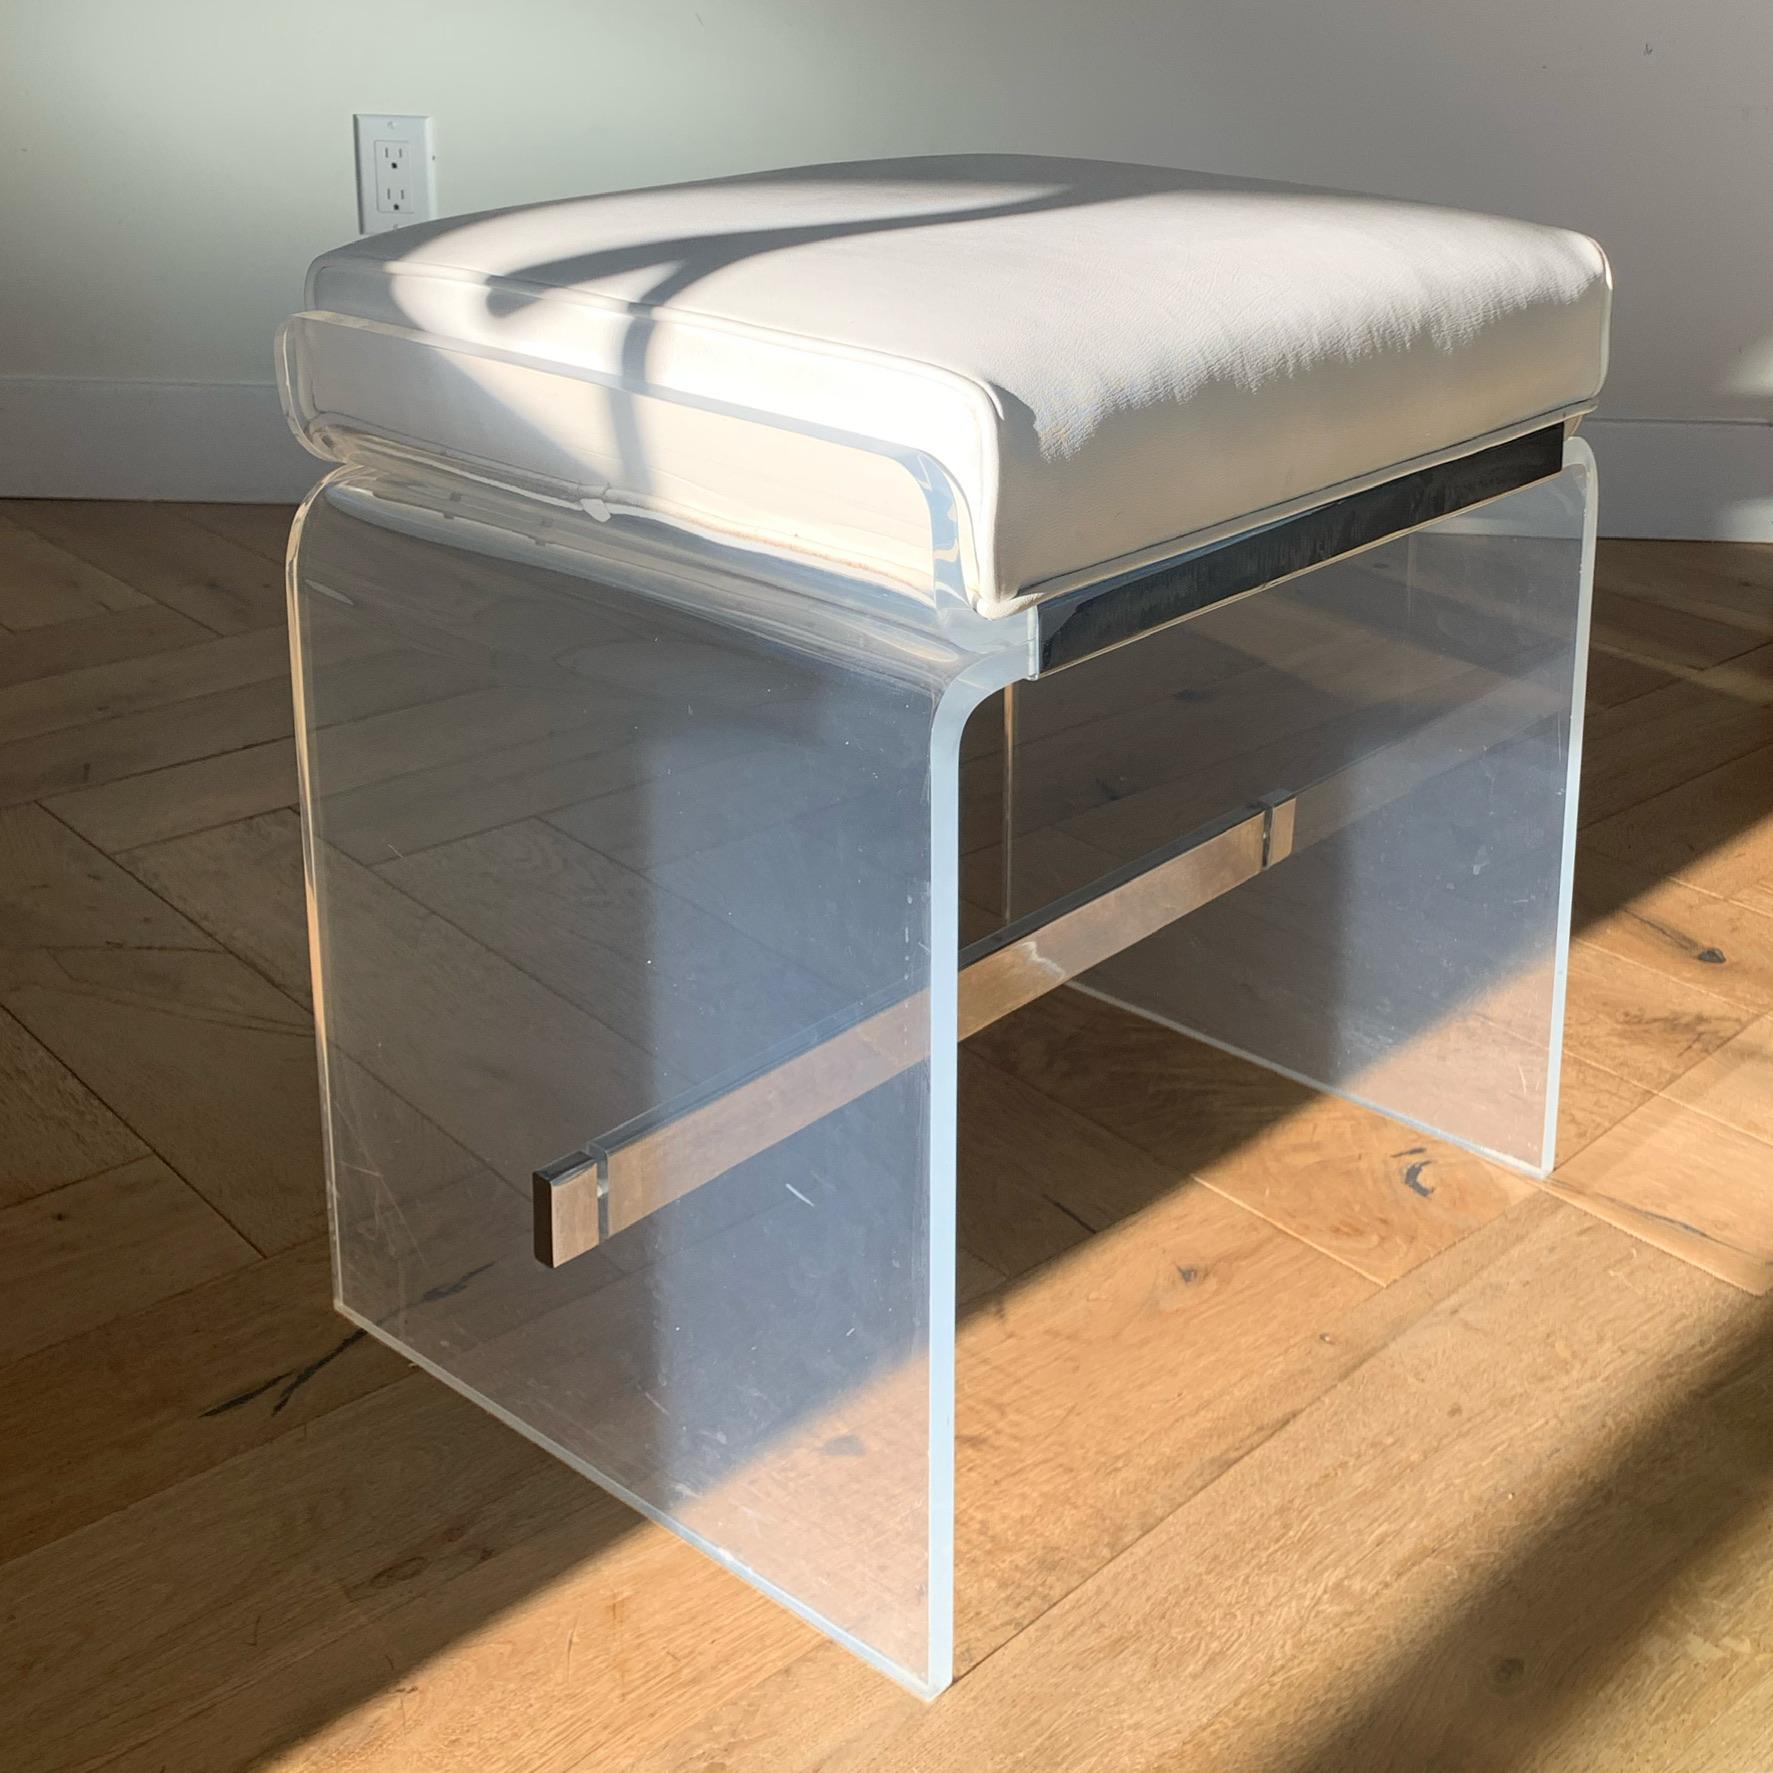 Charles Hollis Jones lucite and chrome waterfall stool, circa 1970s. White leather upholstery is original to piece. Minor signs of age but overall fabulous condition. 

Measures: 17.75” W x 14” D x 19” H.